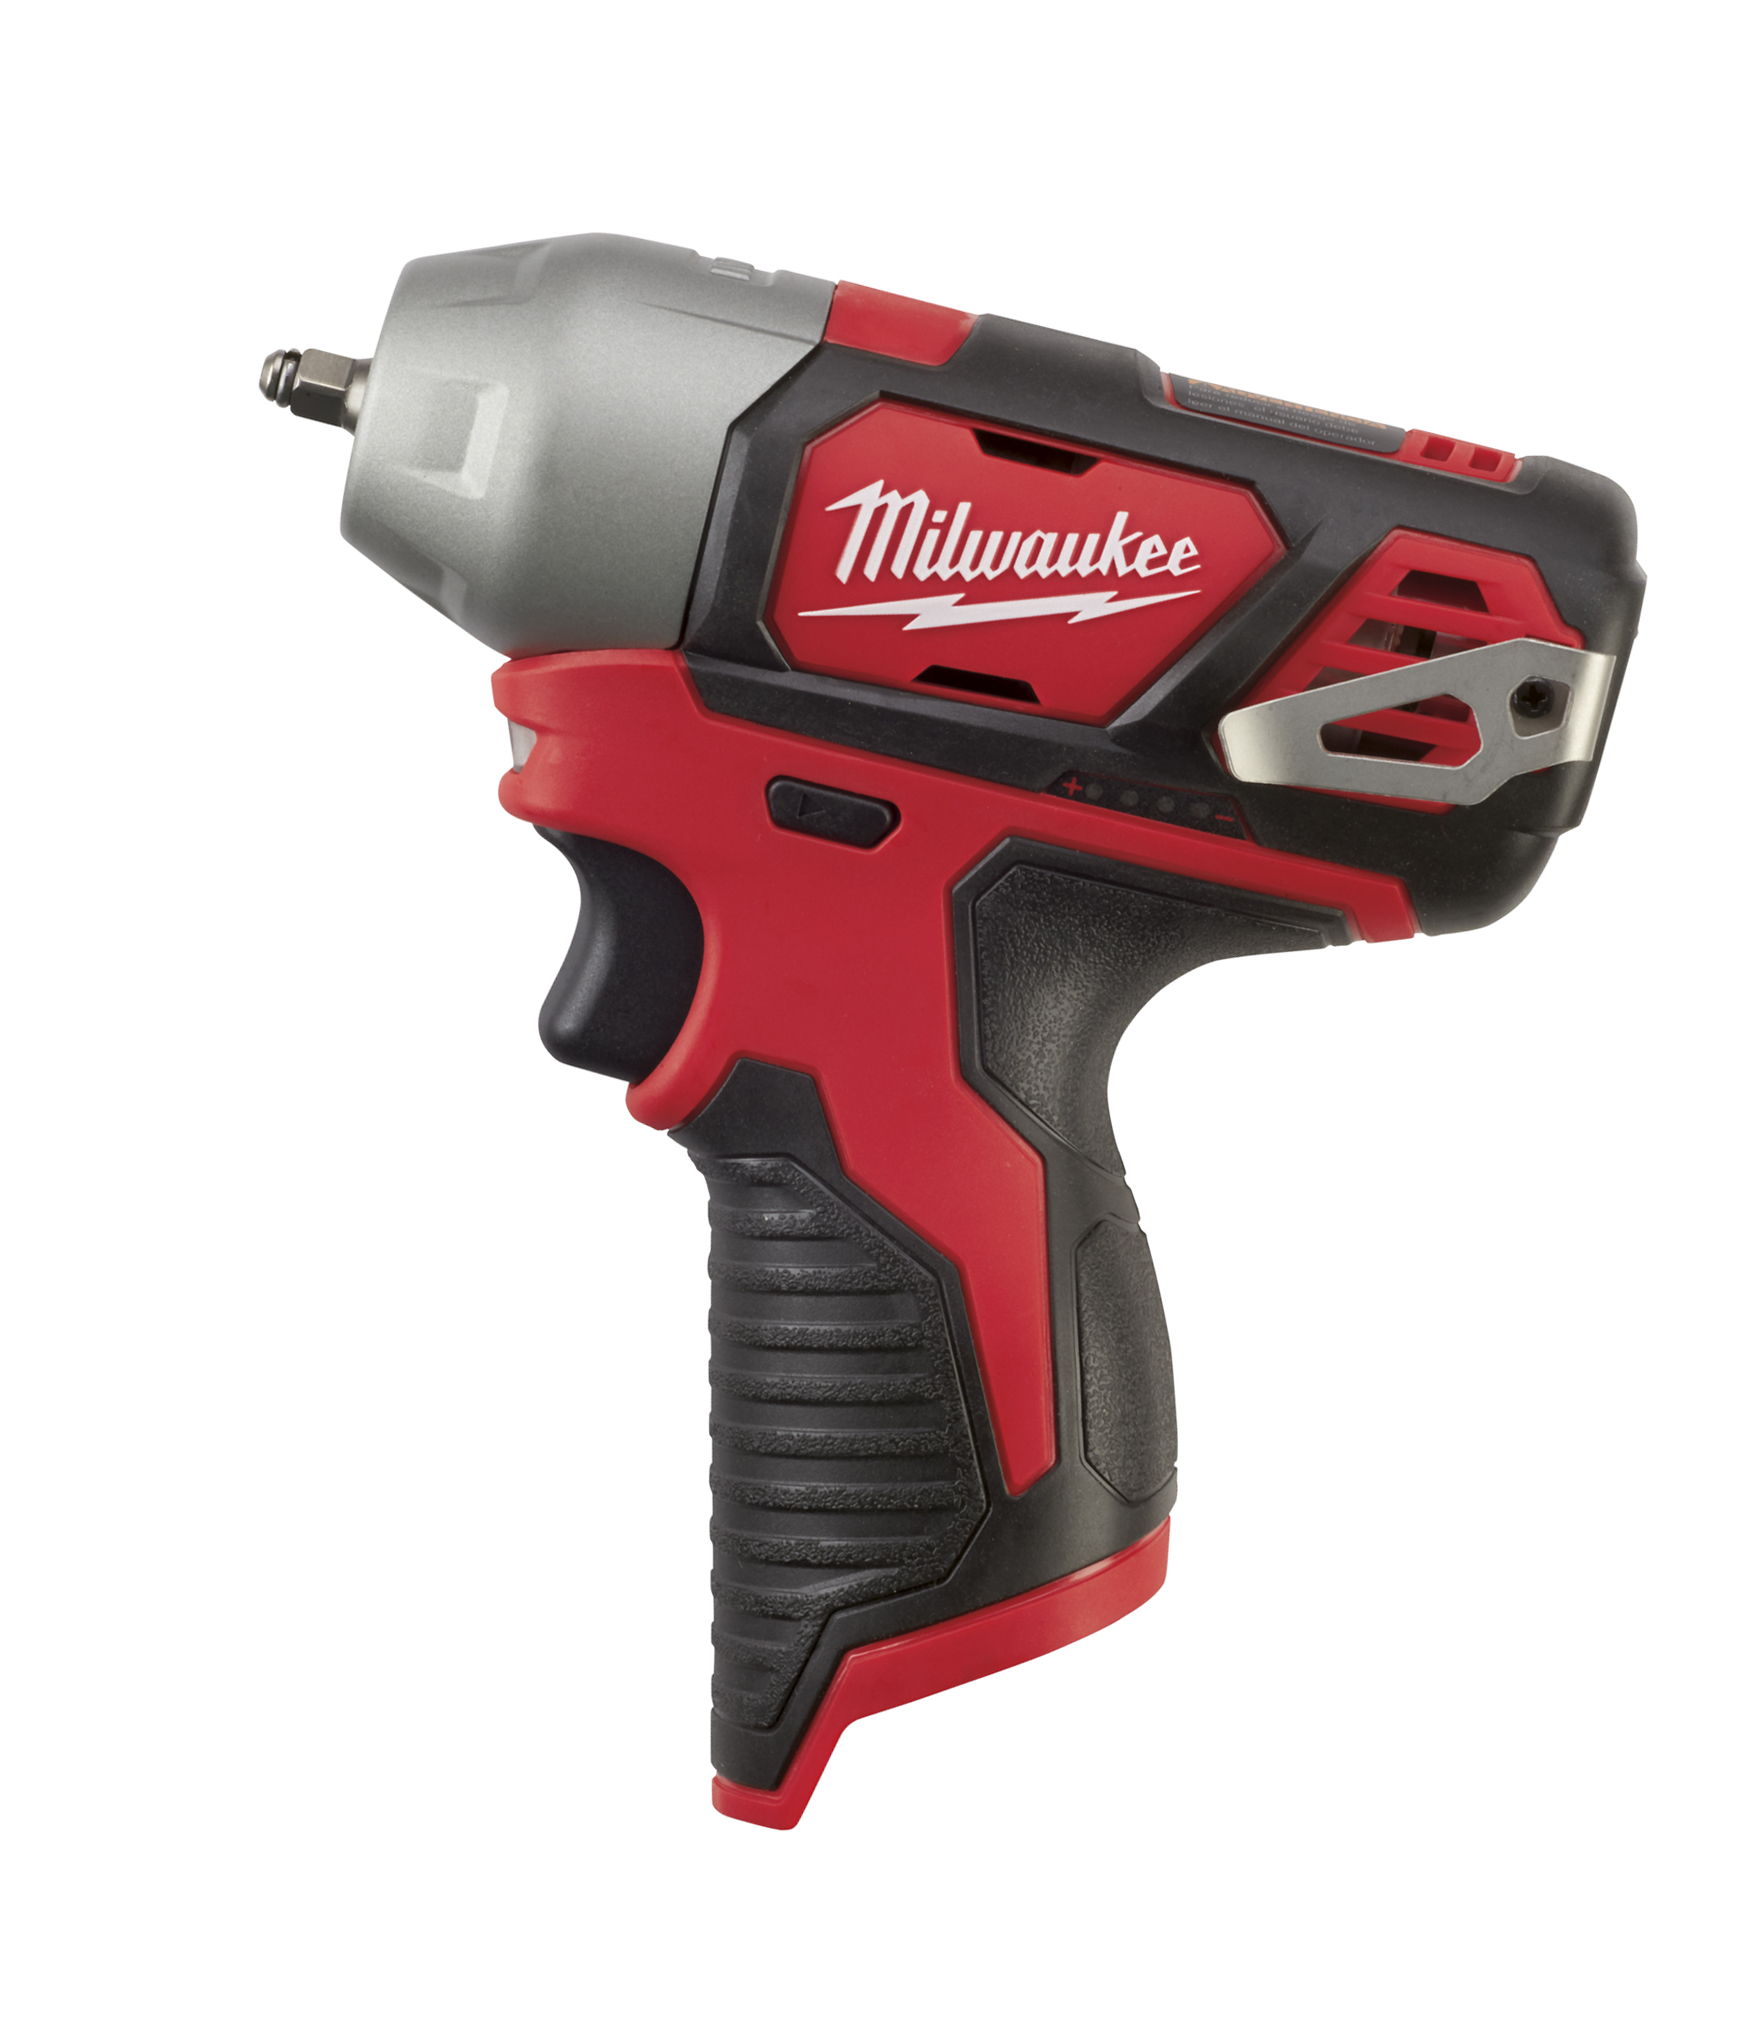 M12 12 Volt Lithium-Ion Cordless ¼ in. Impact Wrench